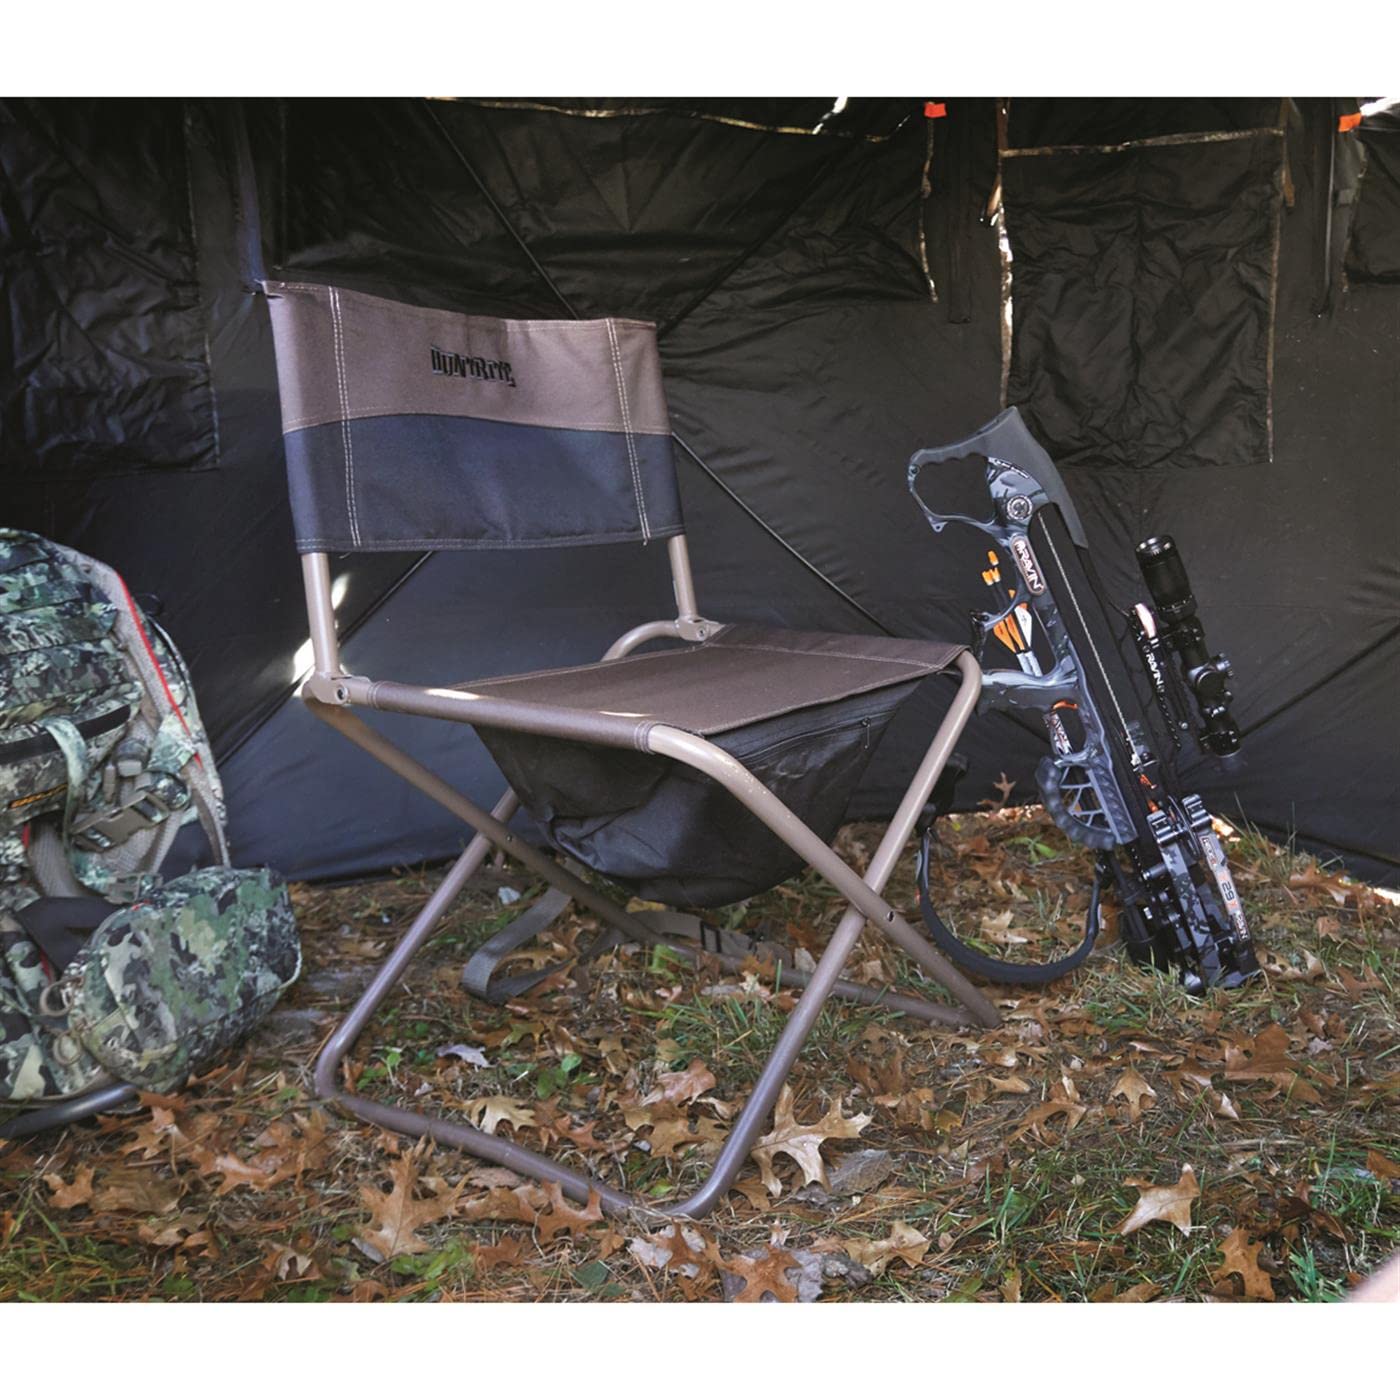 Huntrite Legend Hunting Chair Lightweight Folding Hunt Seat Portable Packable Hunting Gear Equipment, 250-lbs Capacity